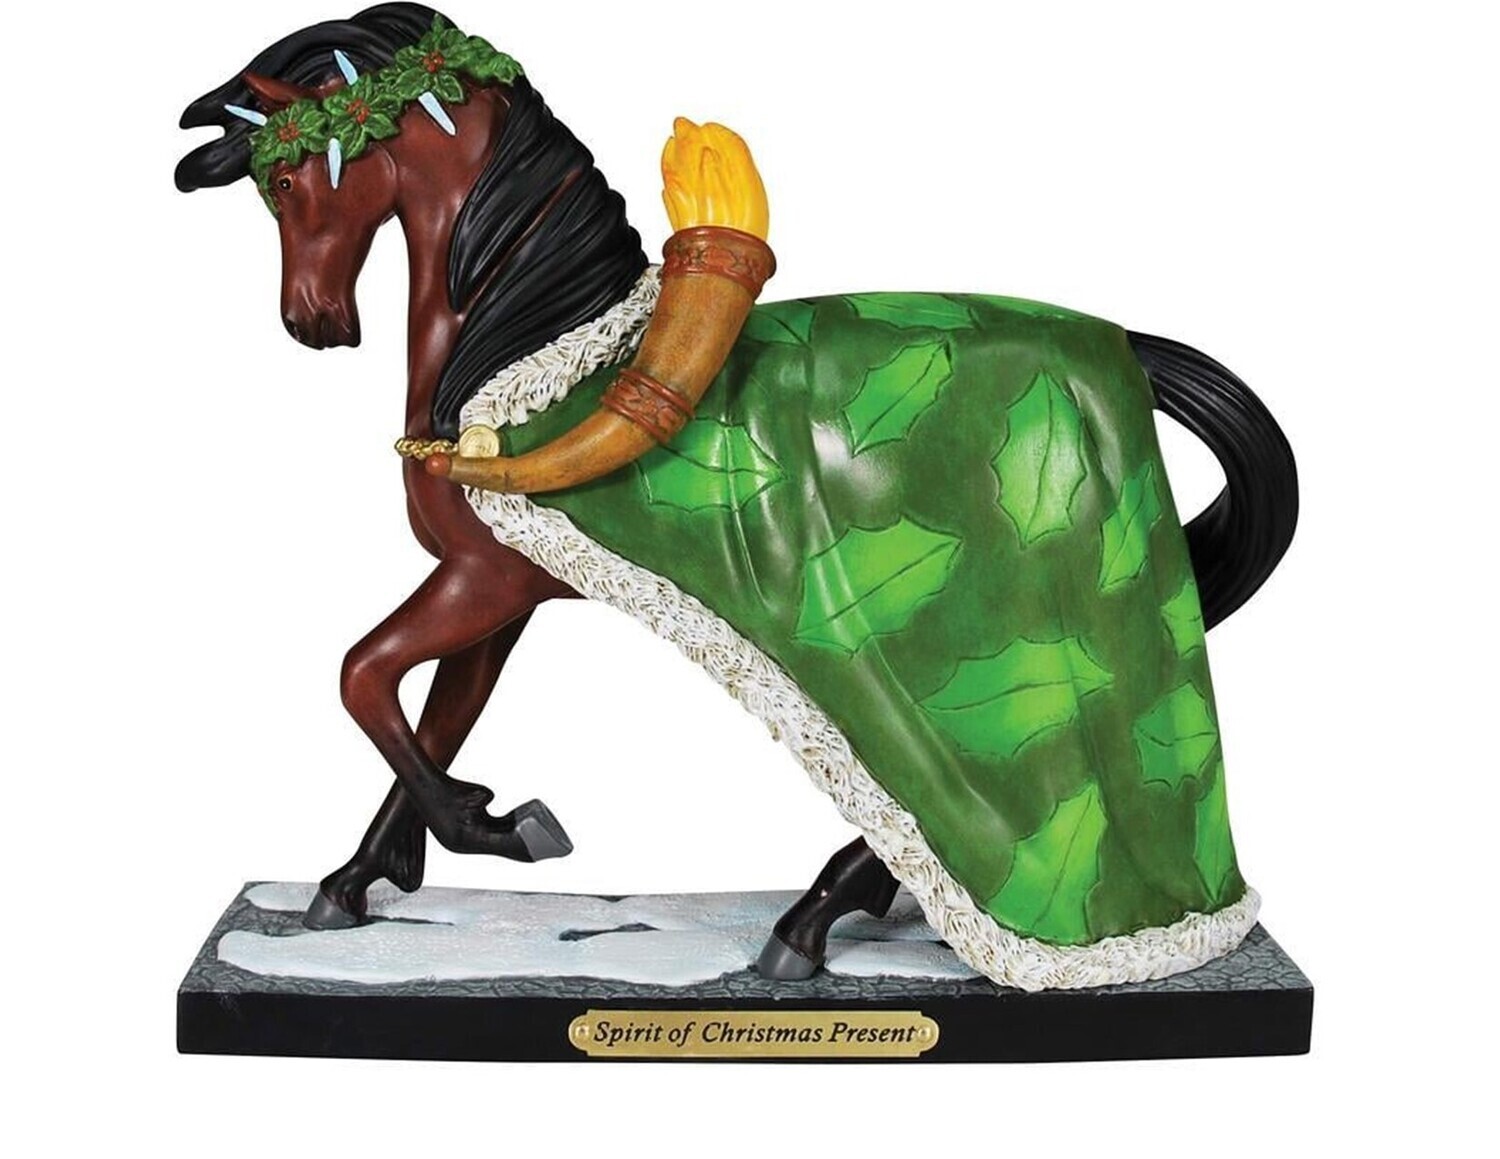 The Trail of Painted Ponies "Spirit of Christmas Present" Horse Figurine (6011698)